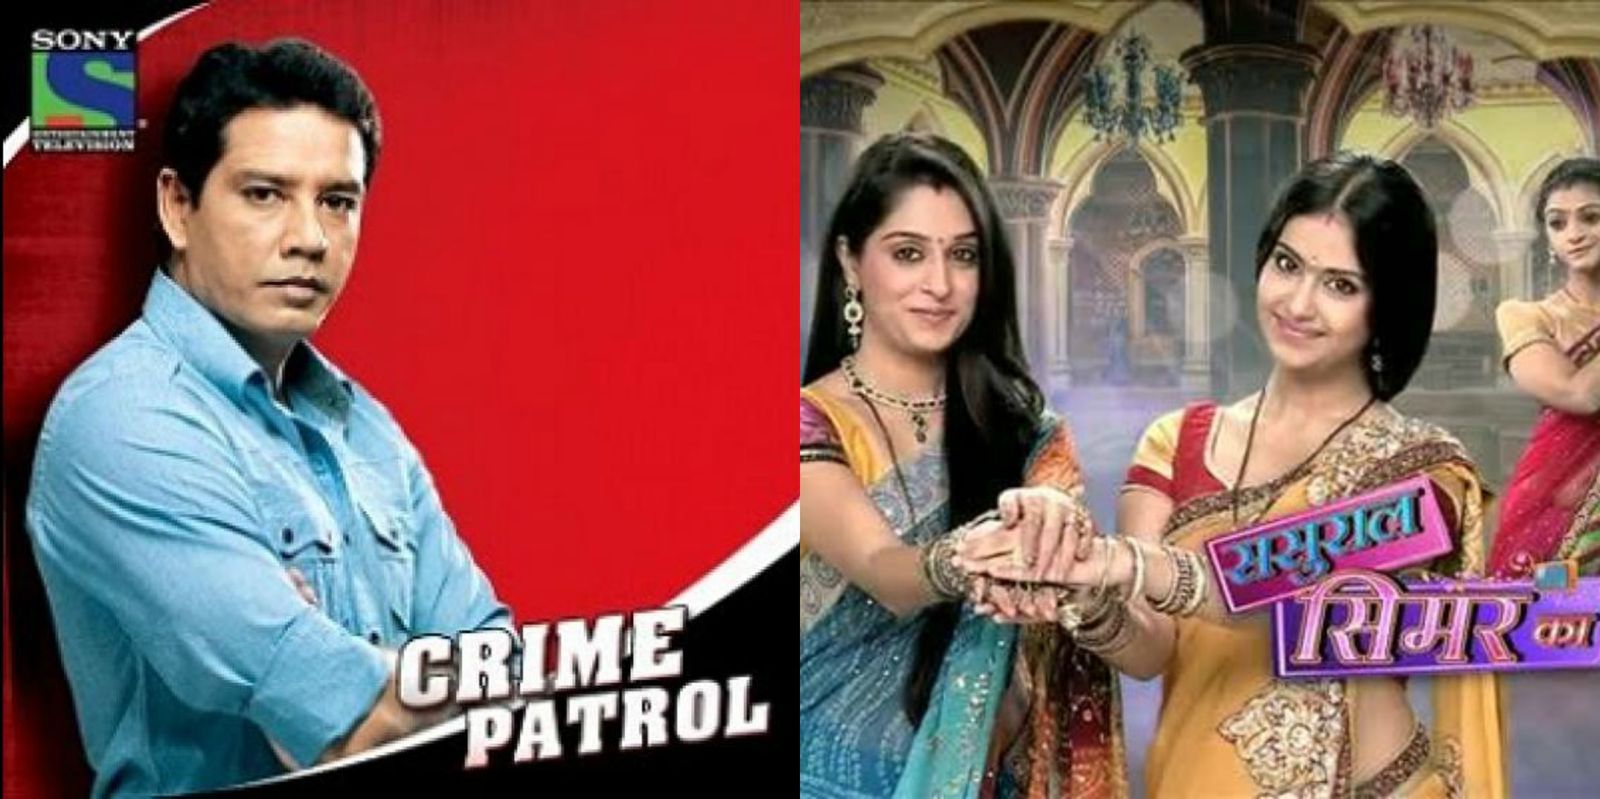 7 Shows On Indian TV That Our Parents Need To Stop Watching Right Now!